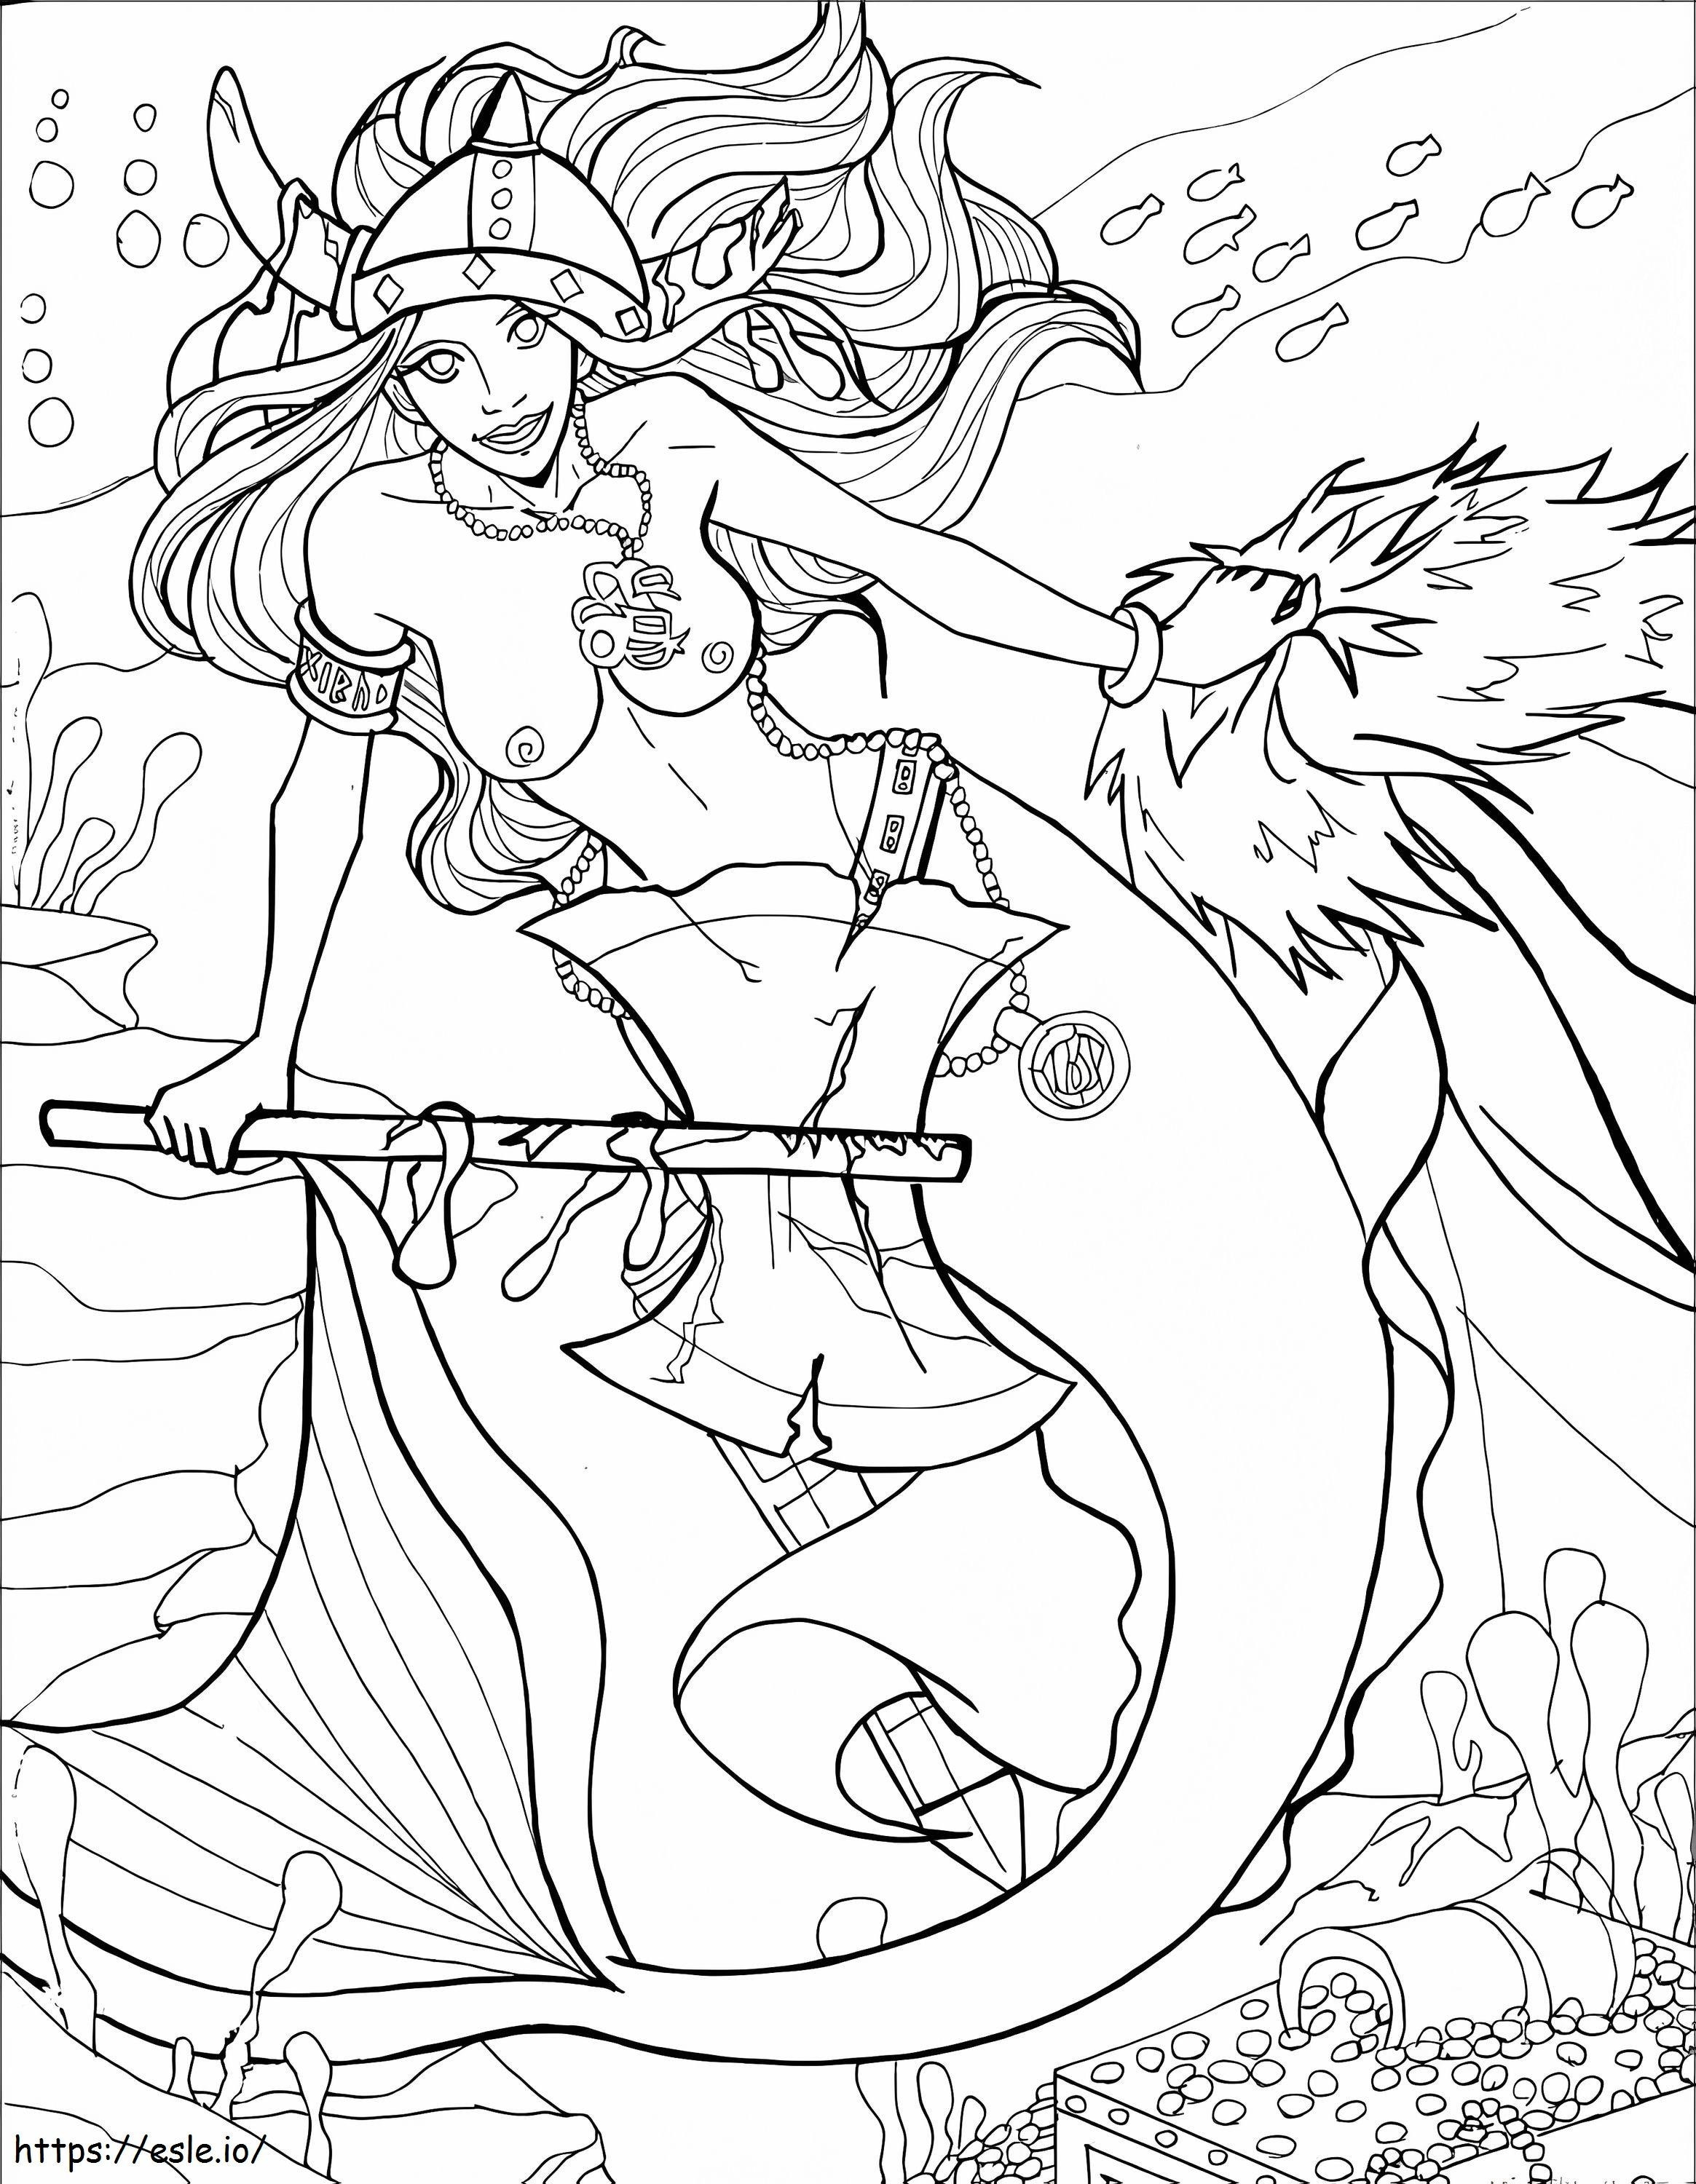 Mermaid With Axe coloring page